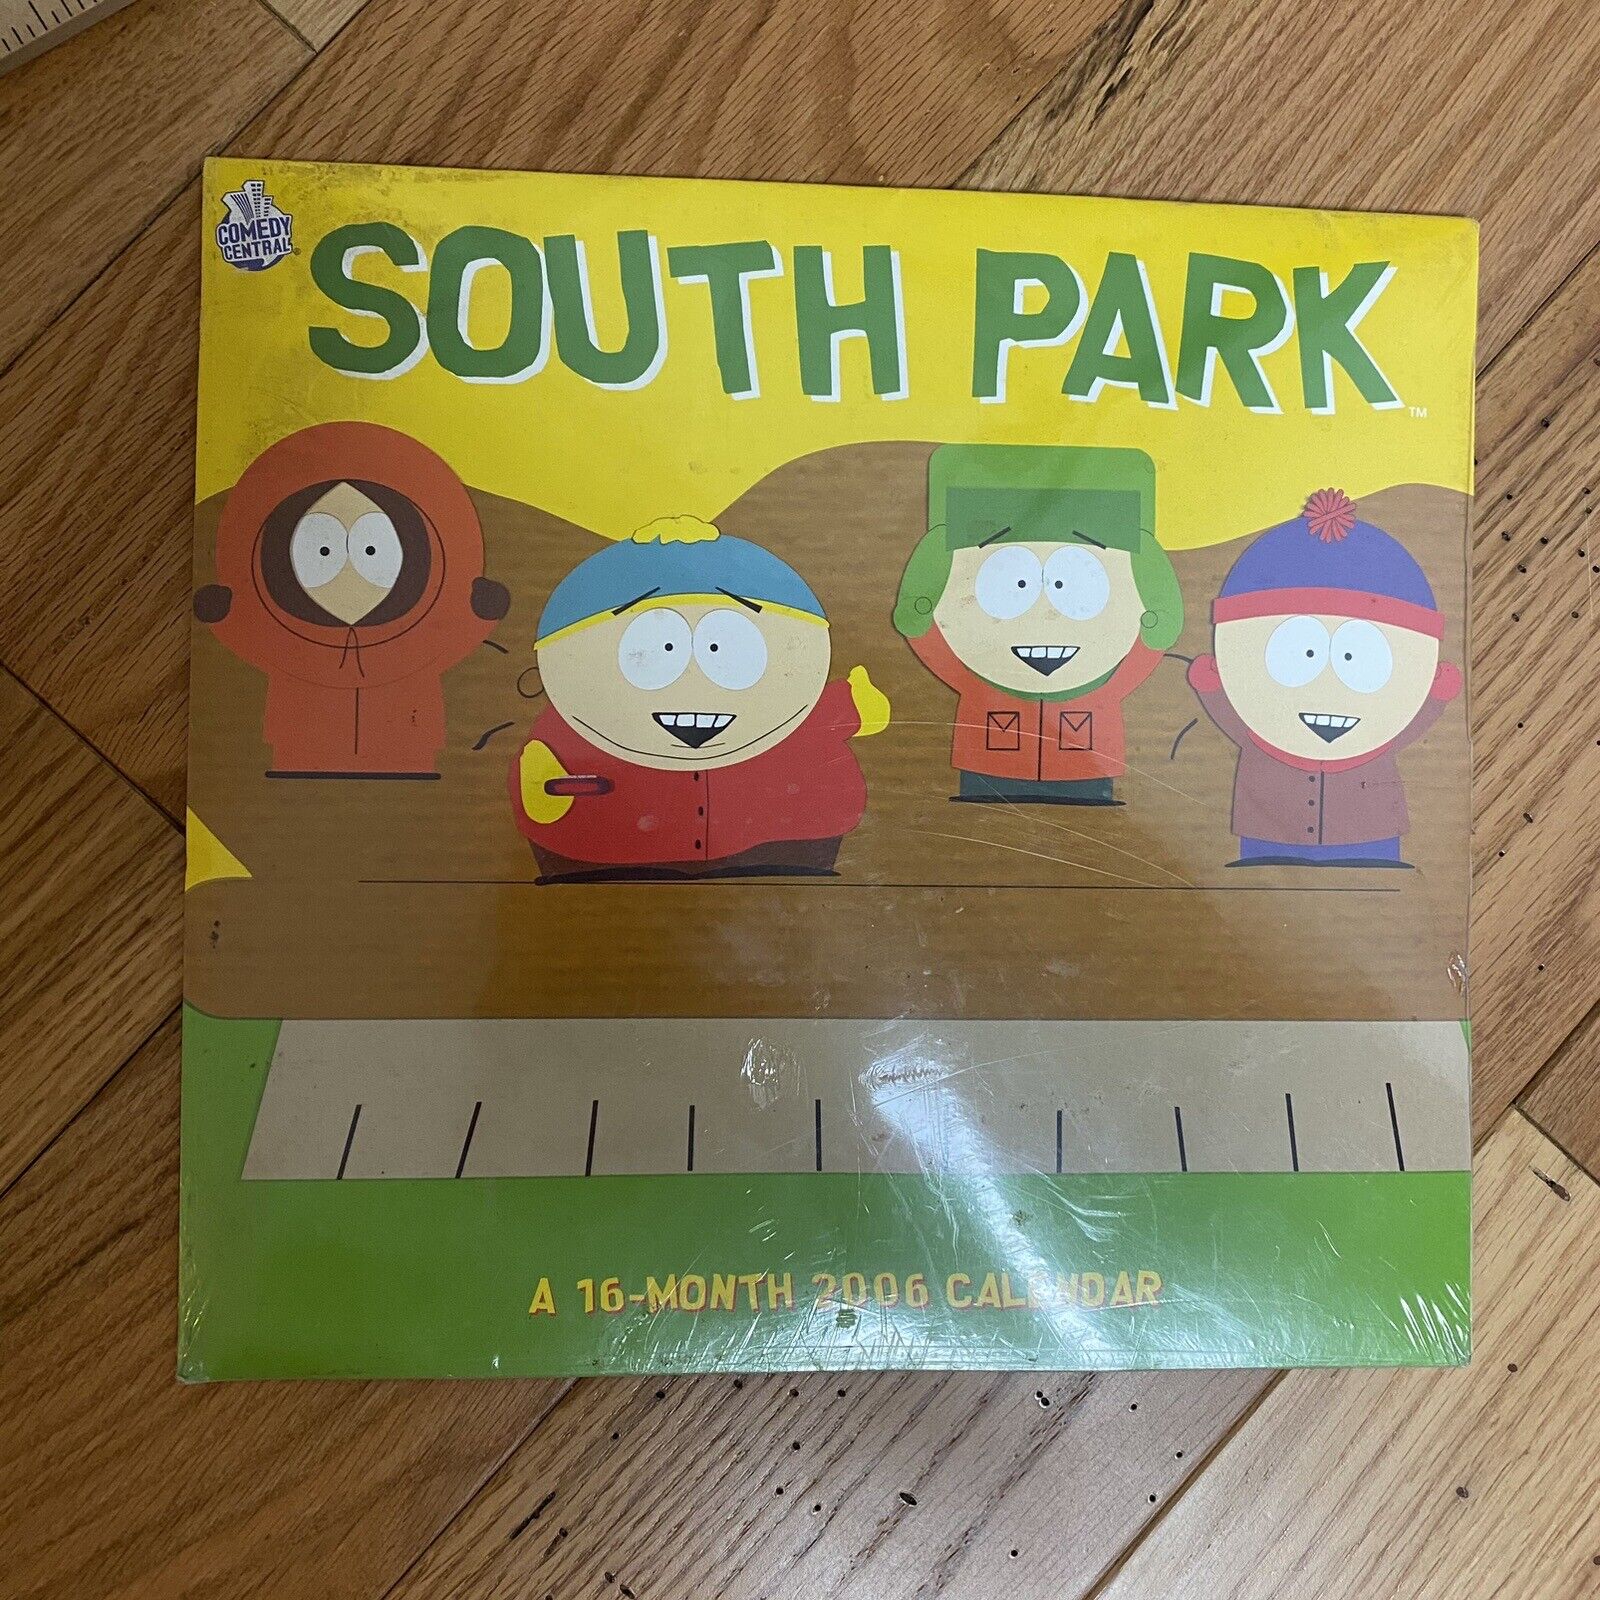 2006 South Park 16-Month Wall Calendar. Re-uses in 2023, 2034, 2045